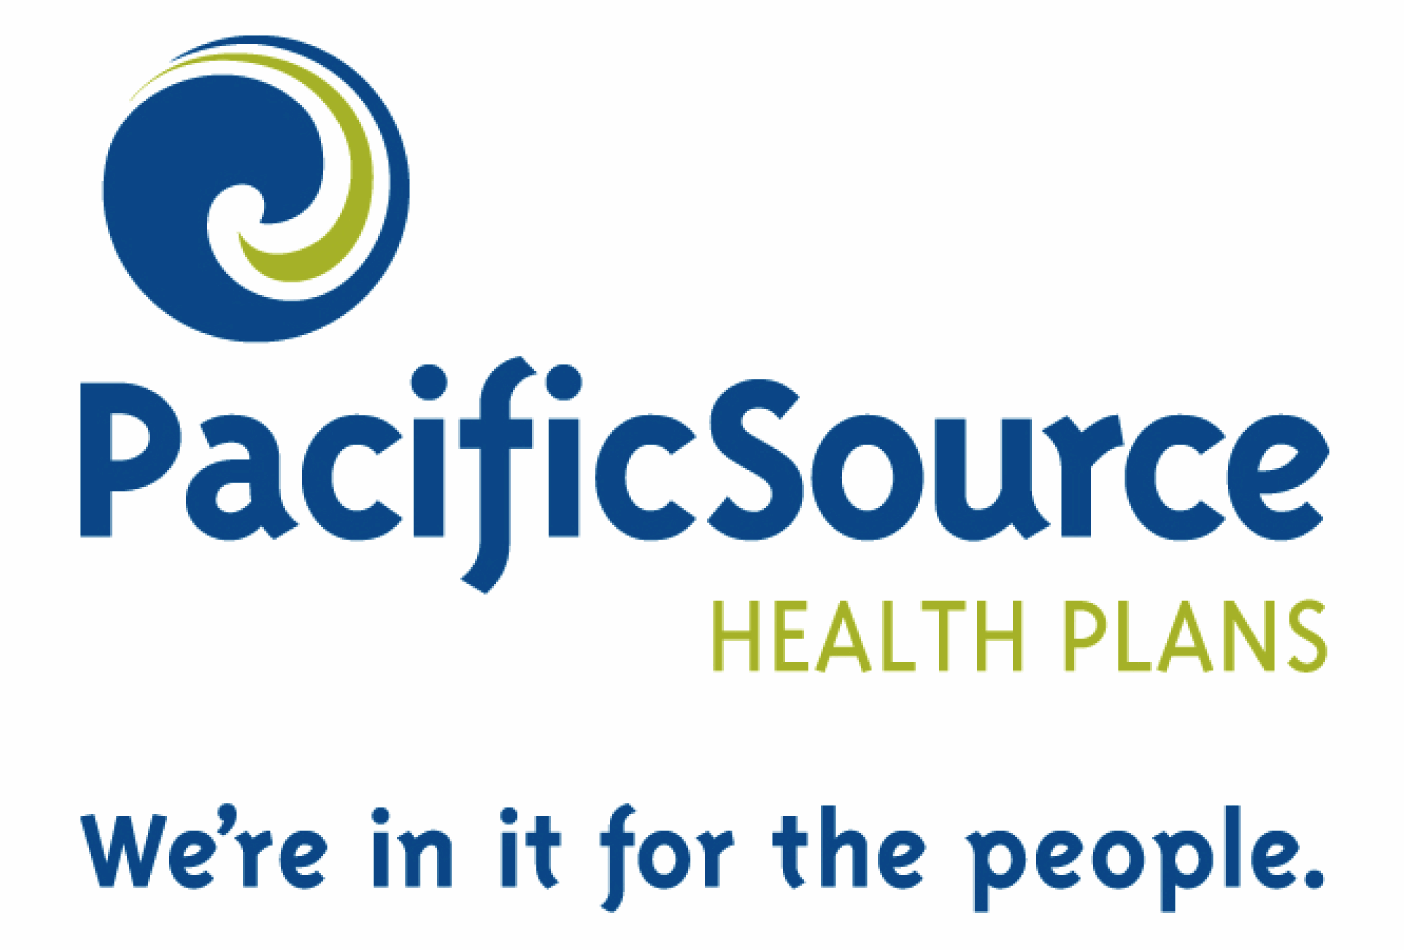 Pacific Source